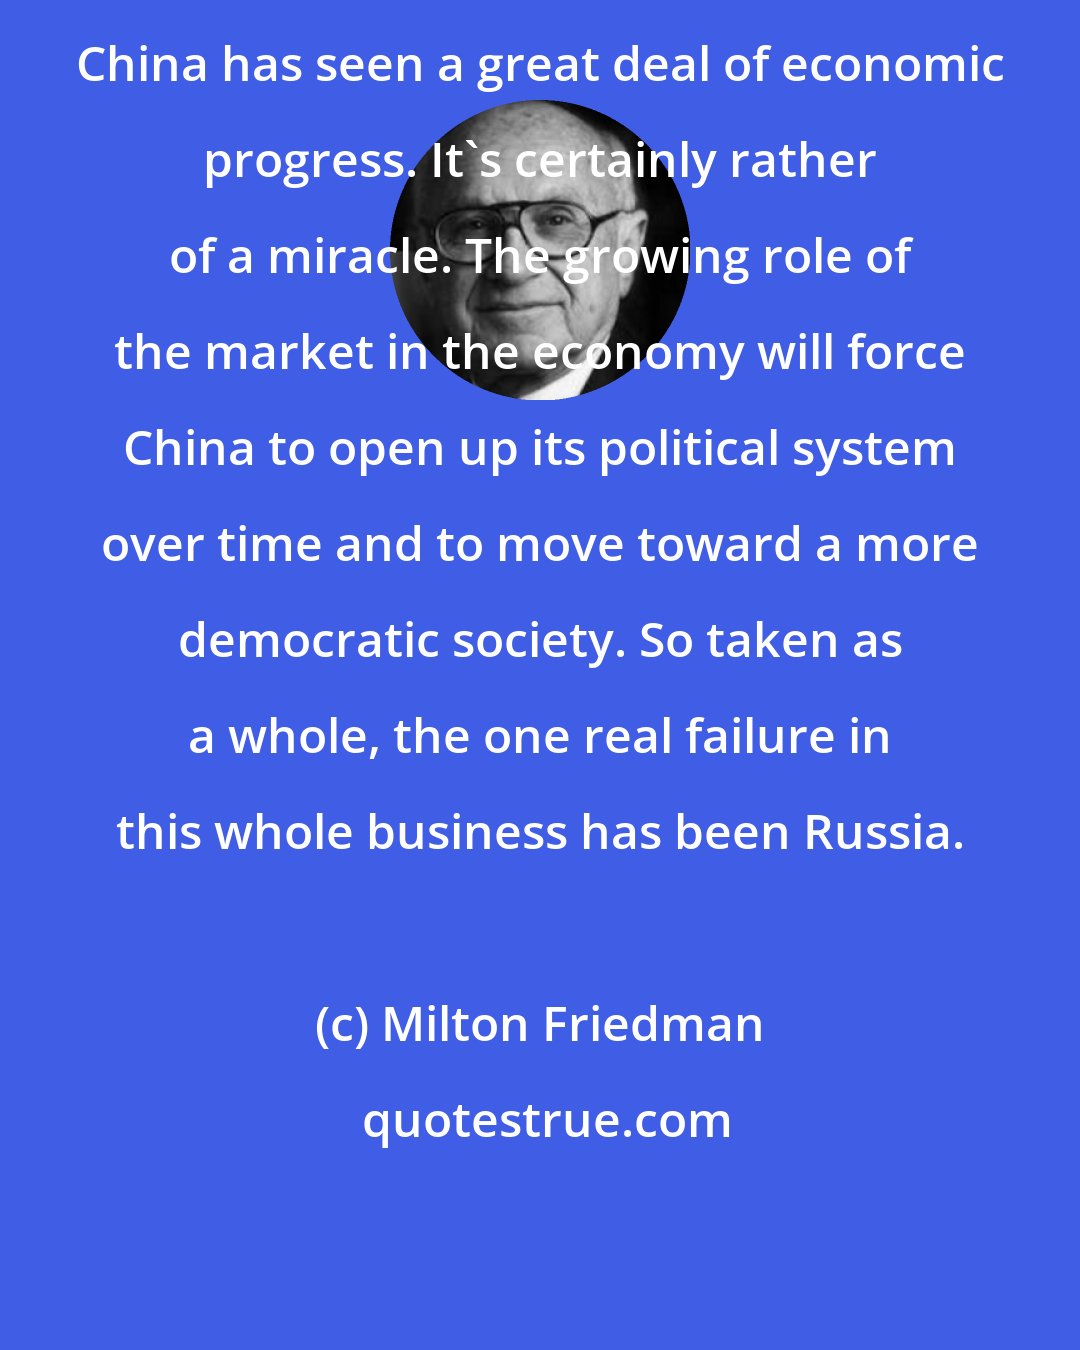 Milton Friedman: China has seen a great deal of economic progress. It's certainly rather of a miracle. The growing role of the market in the economy will force China to open up its political system over time and to move toward a more democratic society. So taken as a whole, the one real failure in this whole business has been Russia.